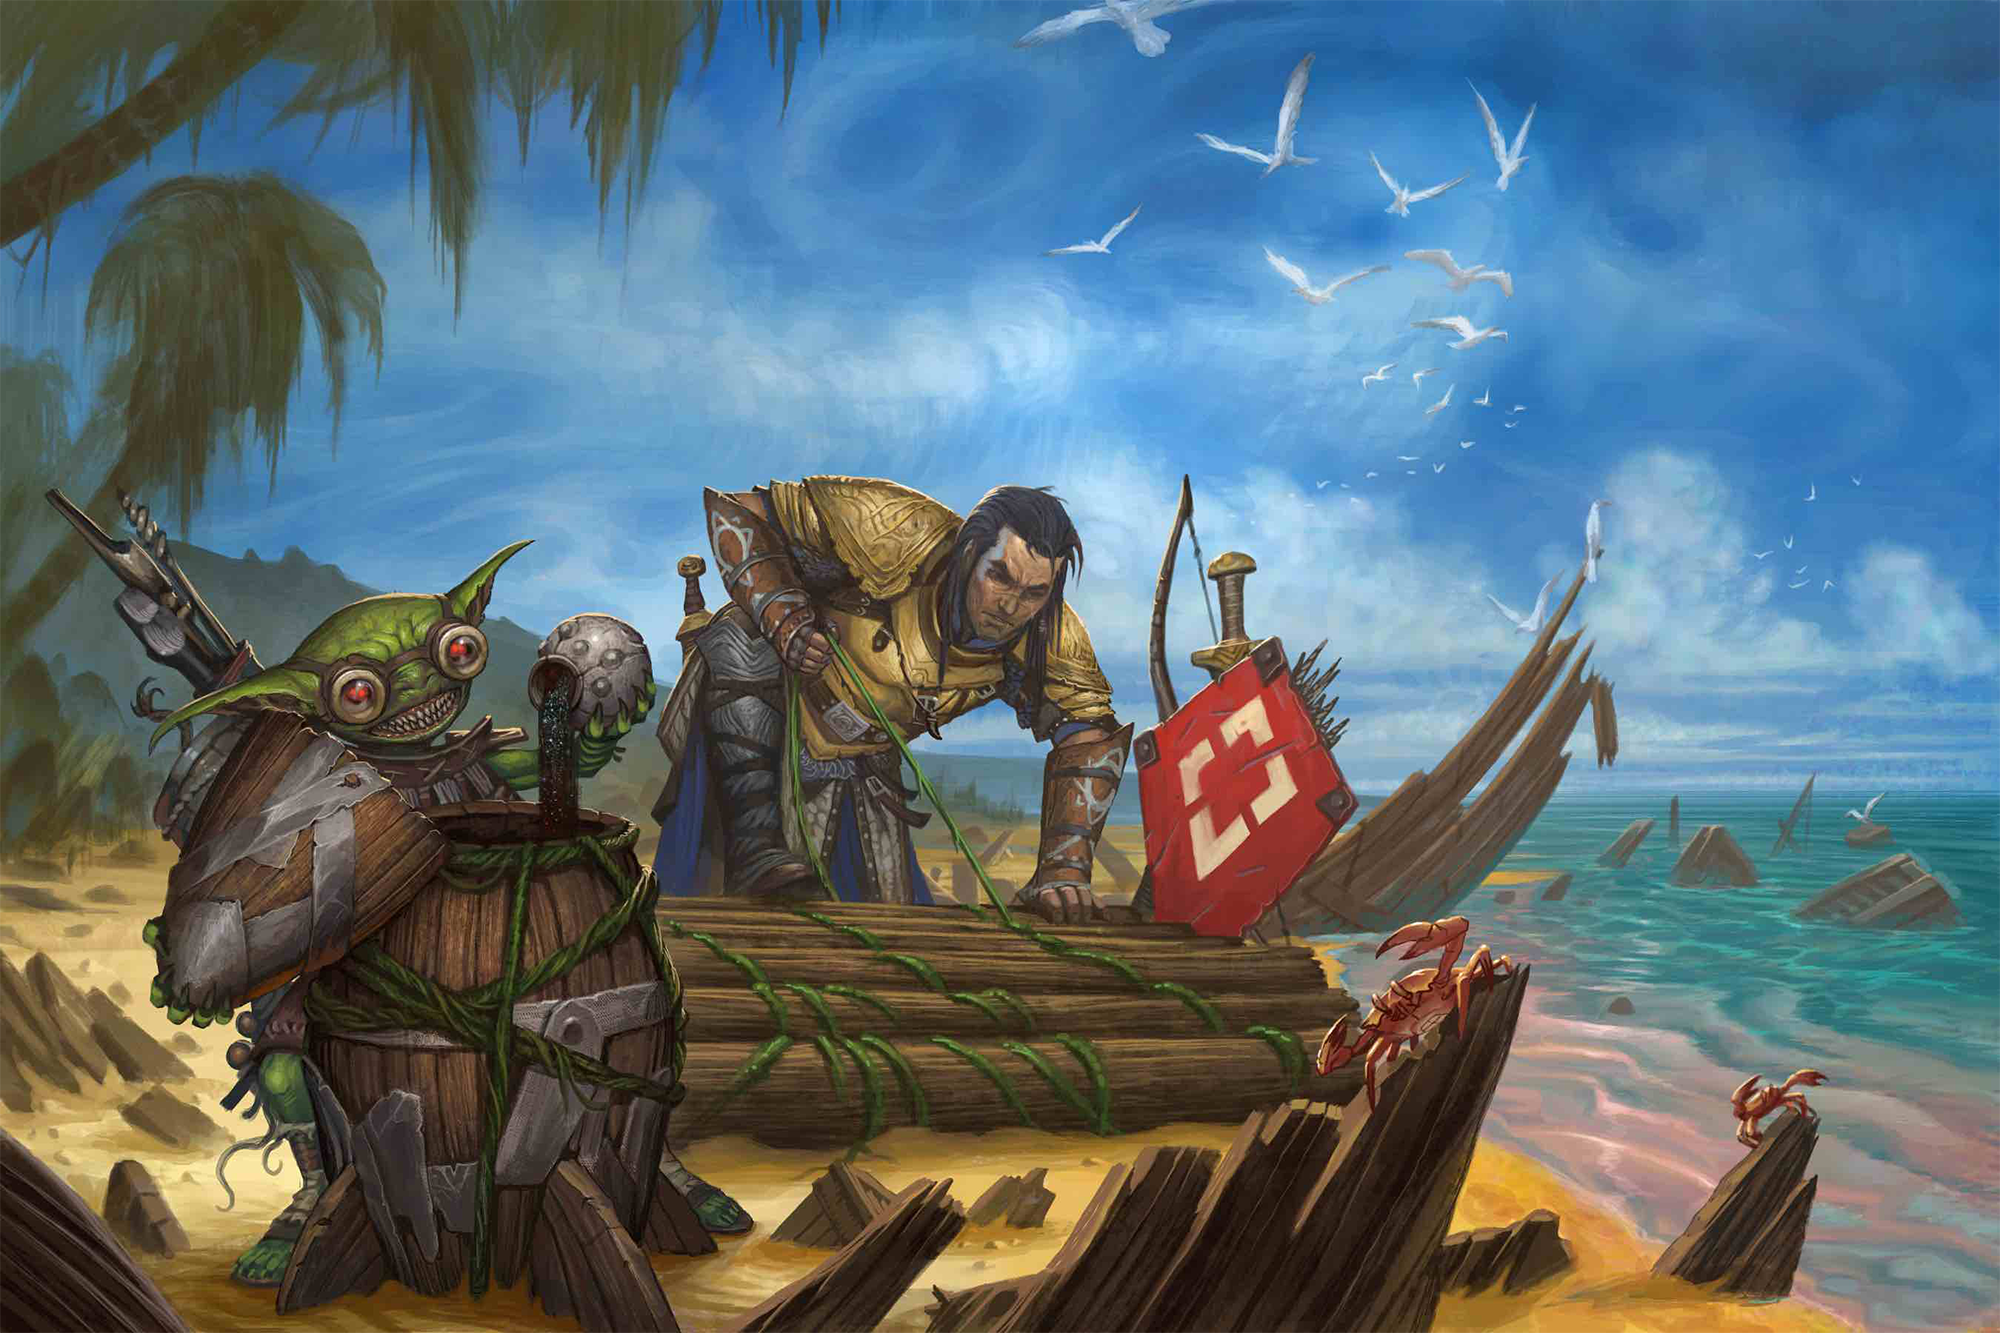 The iconic fighter and the iconic alchemist are on a tropical beach surrounded by the wreckage of a sailing ship. The fighter is building a raft out of logs and vines, while the alchemist is pouring something into an upturned barrel.